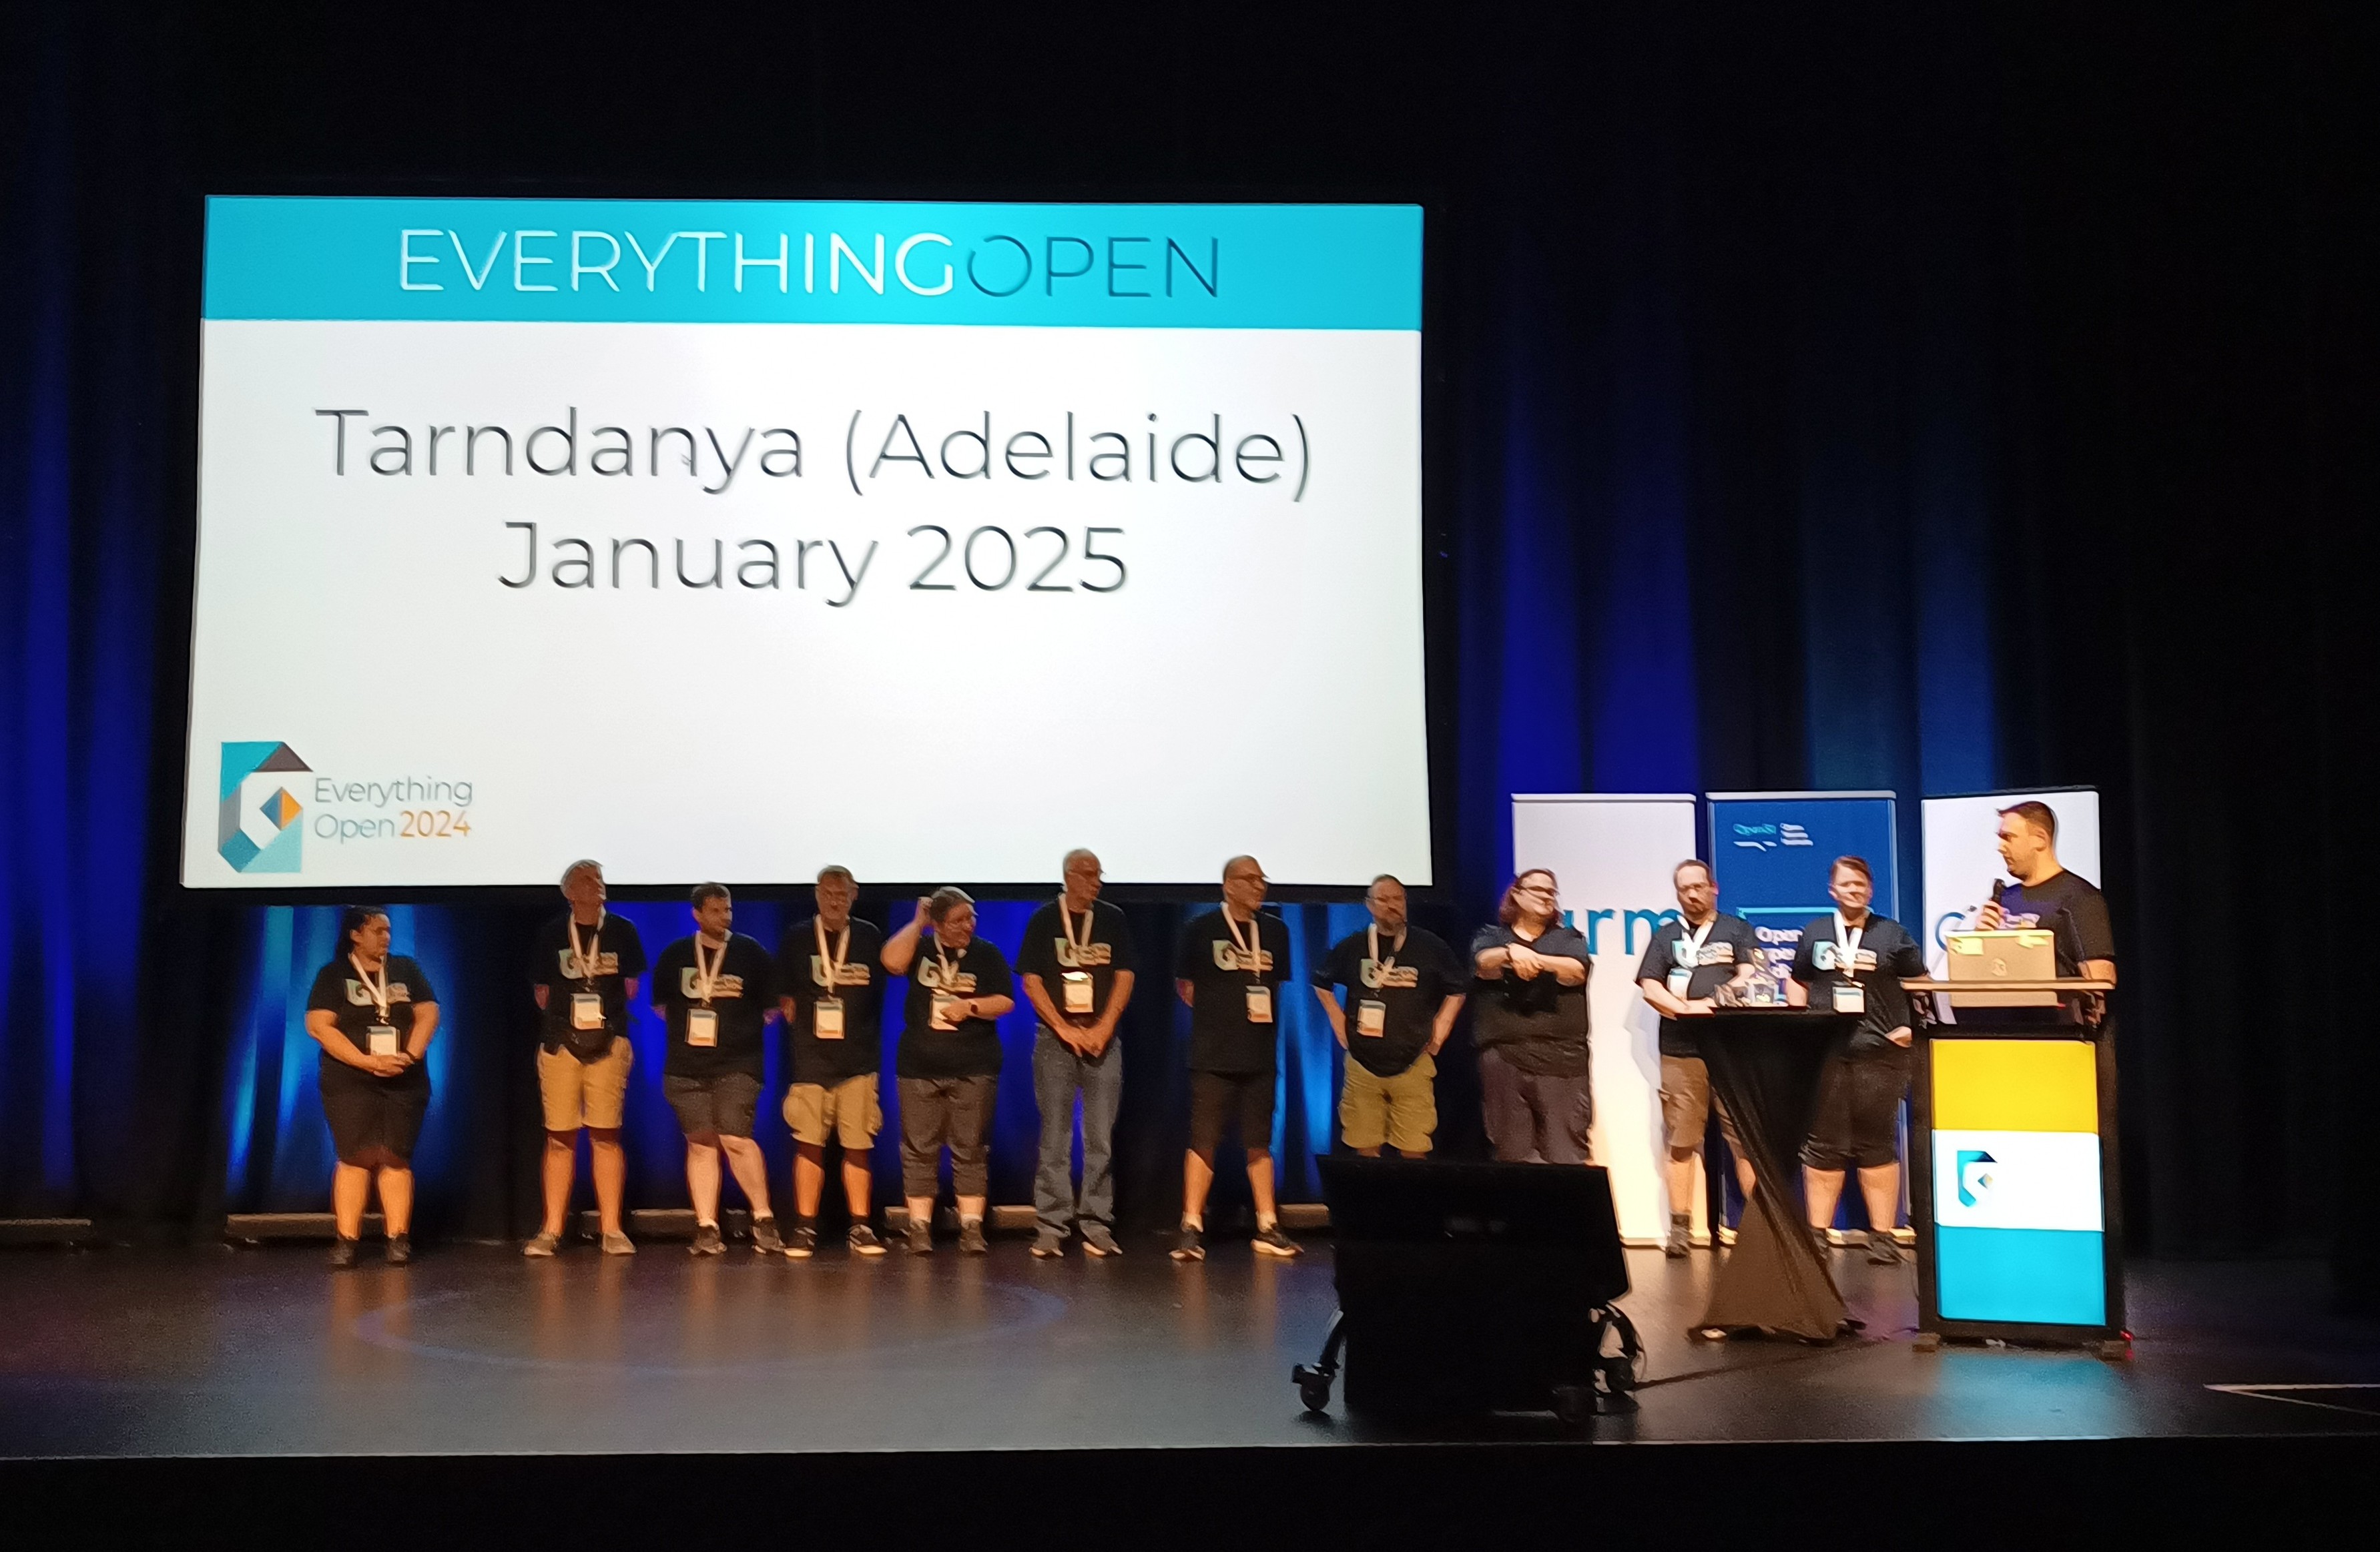 Organisers of the Everything Open conference on stage with screen announcing Tarndanya (Adelaide) in January 2025